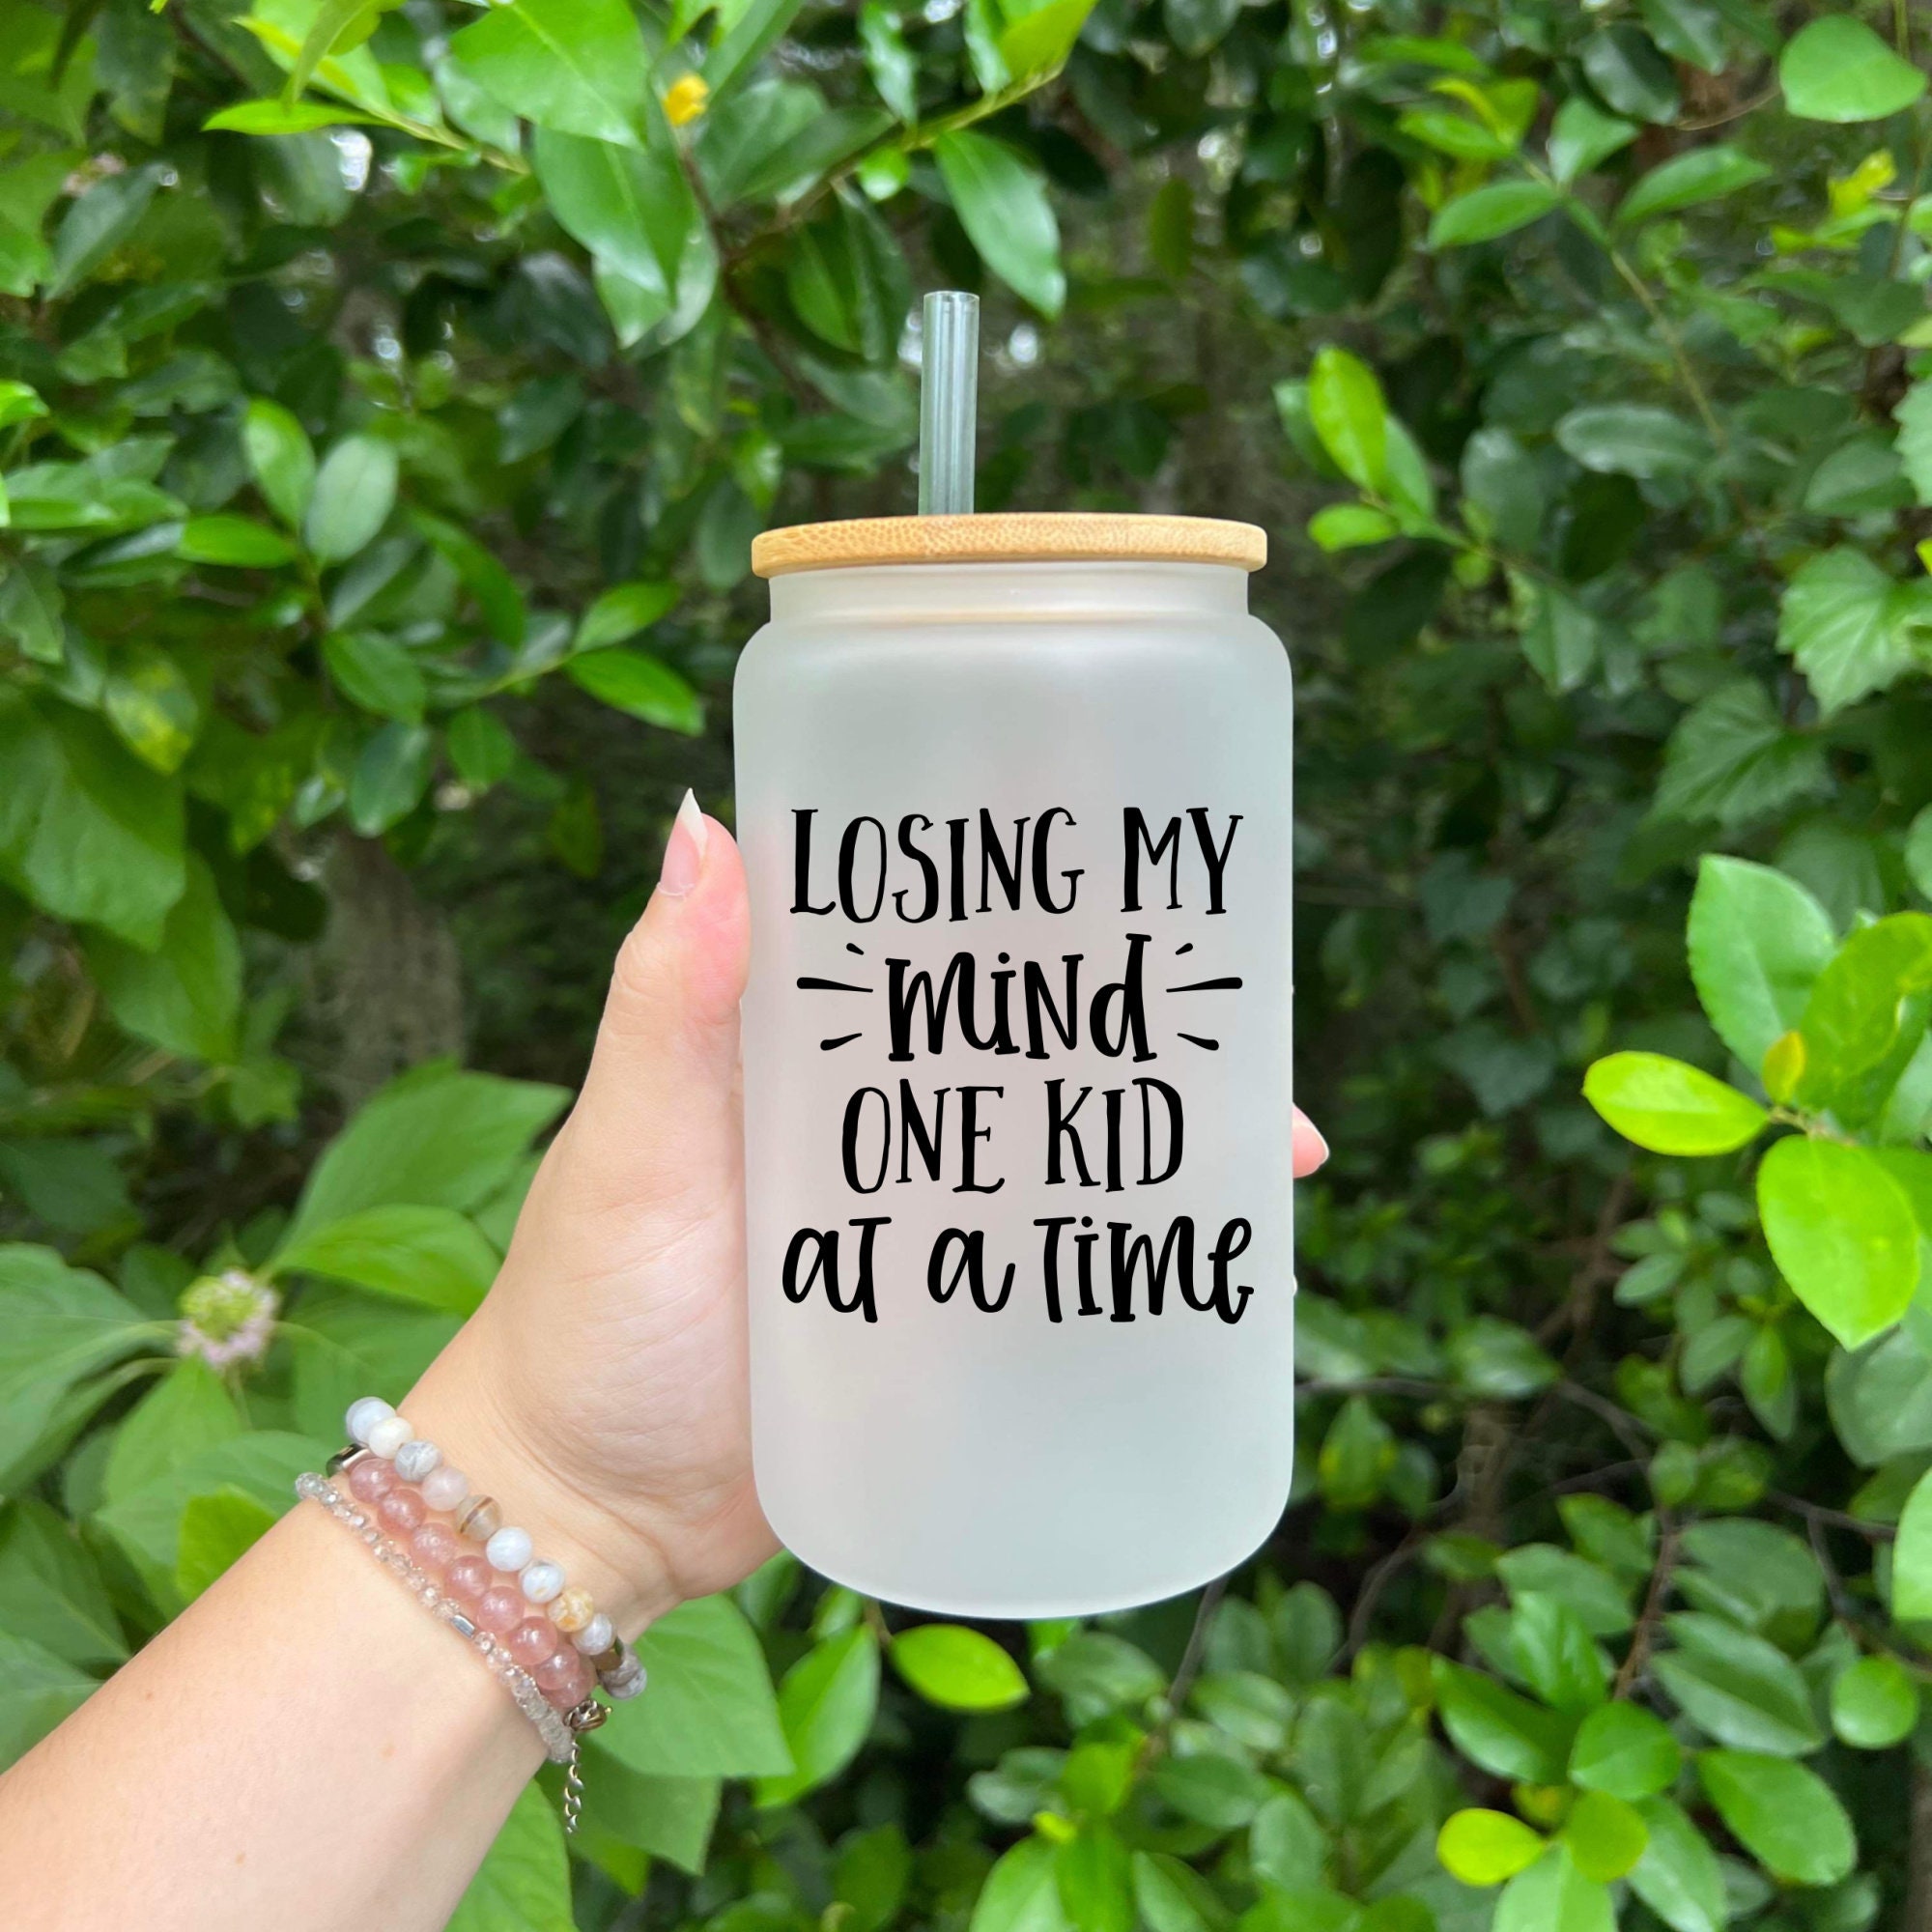 Drink Water and Mind My Business, Custom 34 Oz Water Bottle, Water